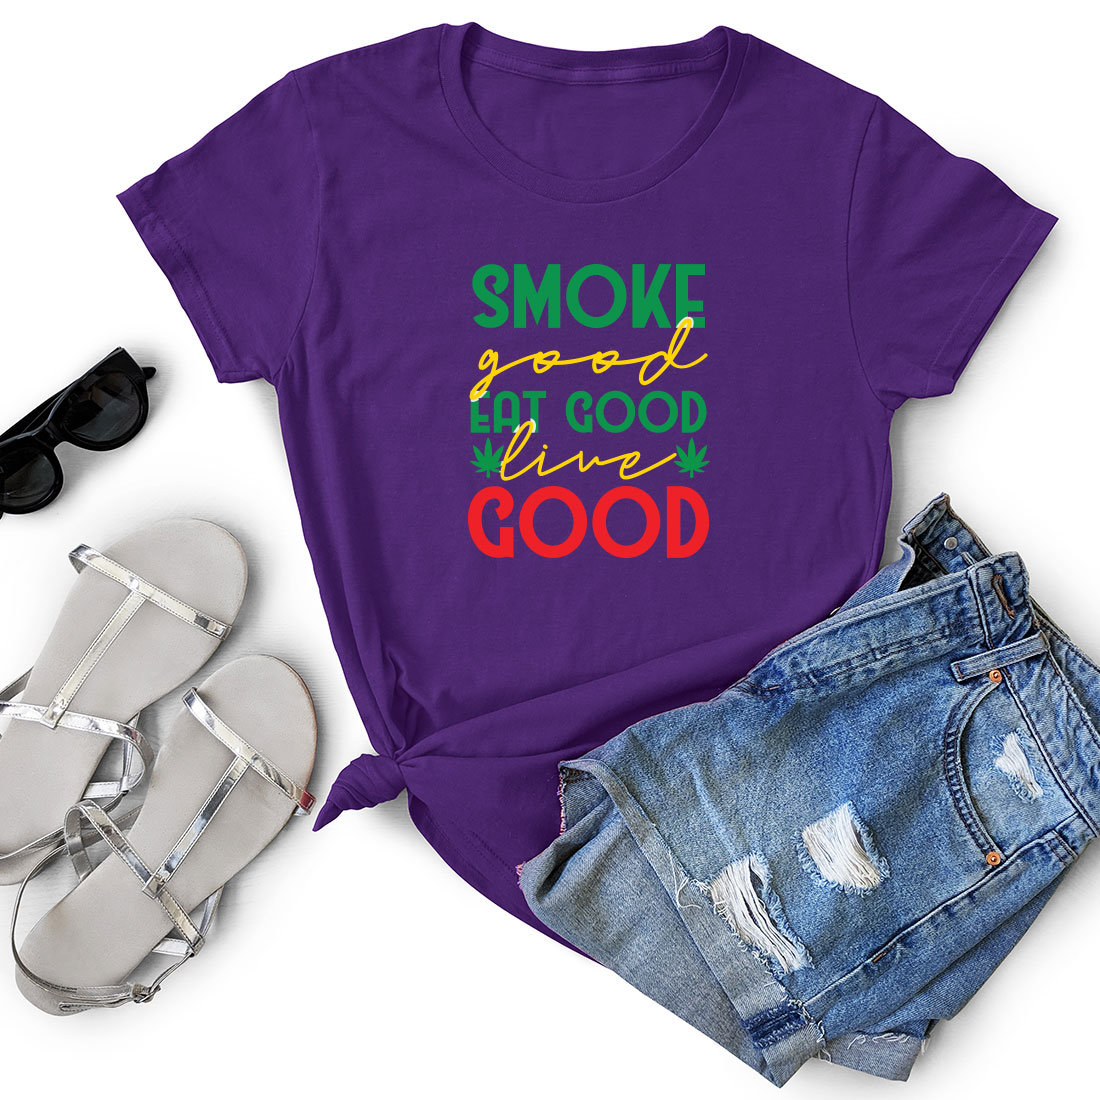 T - shirt that says smoke good and a pair of shorts.